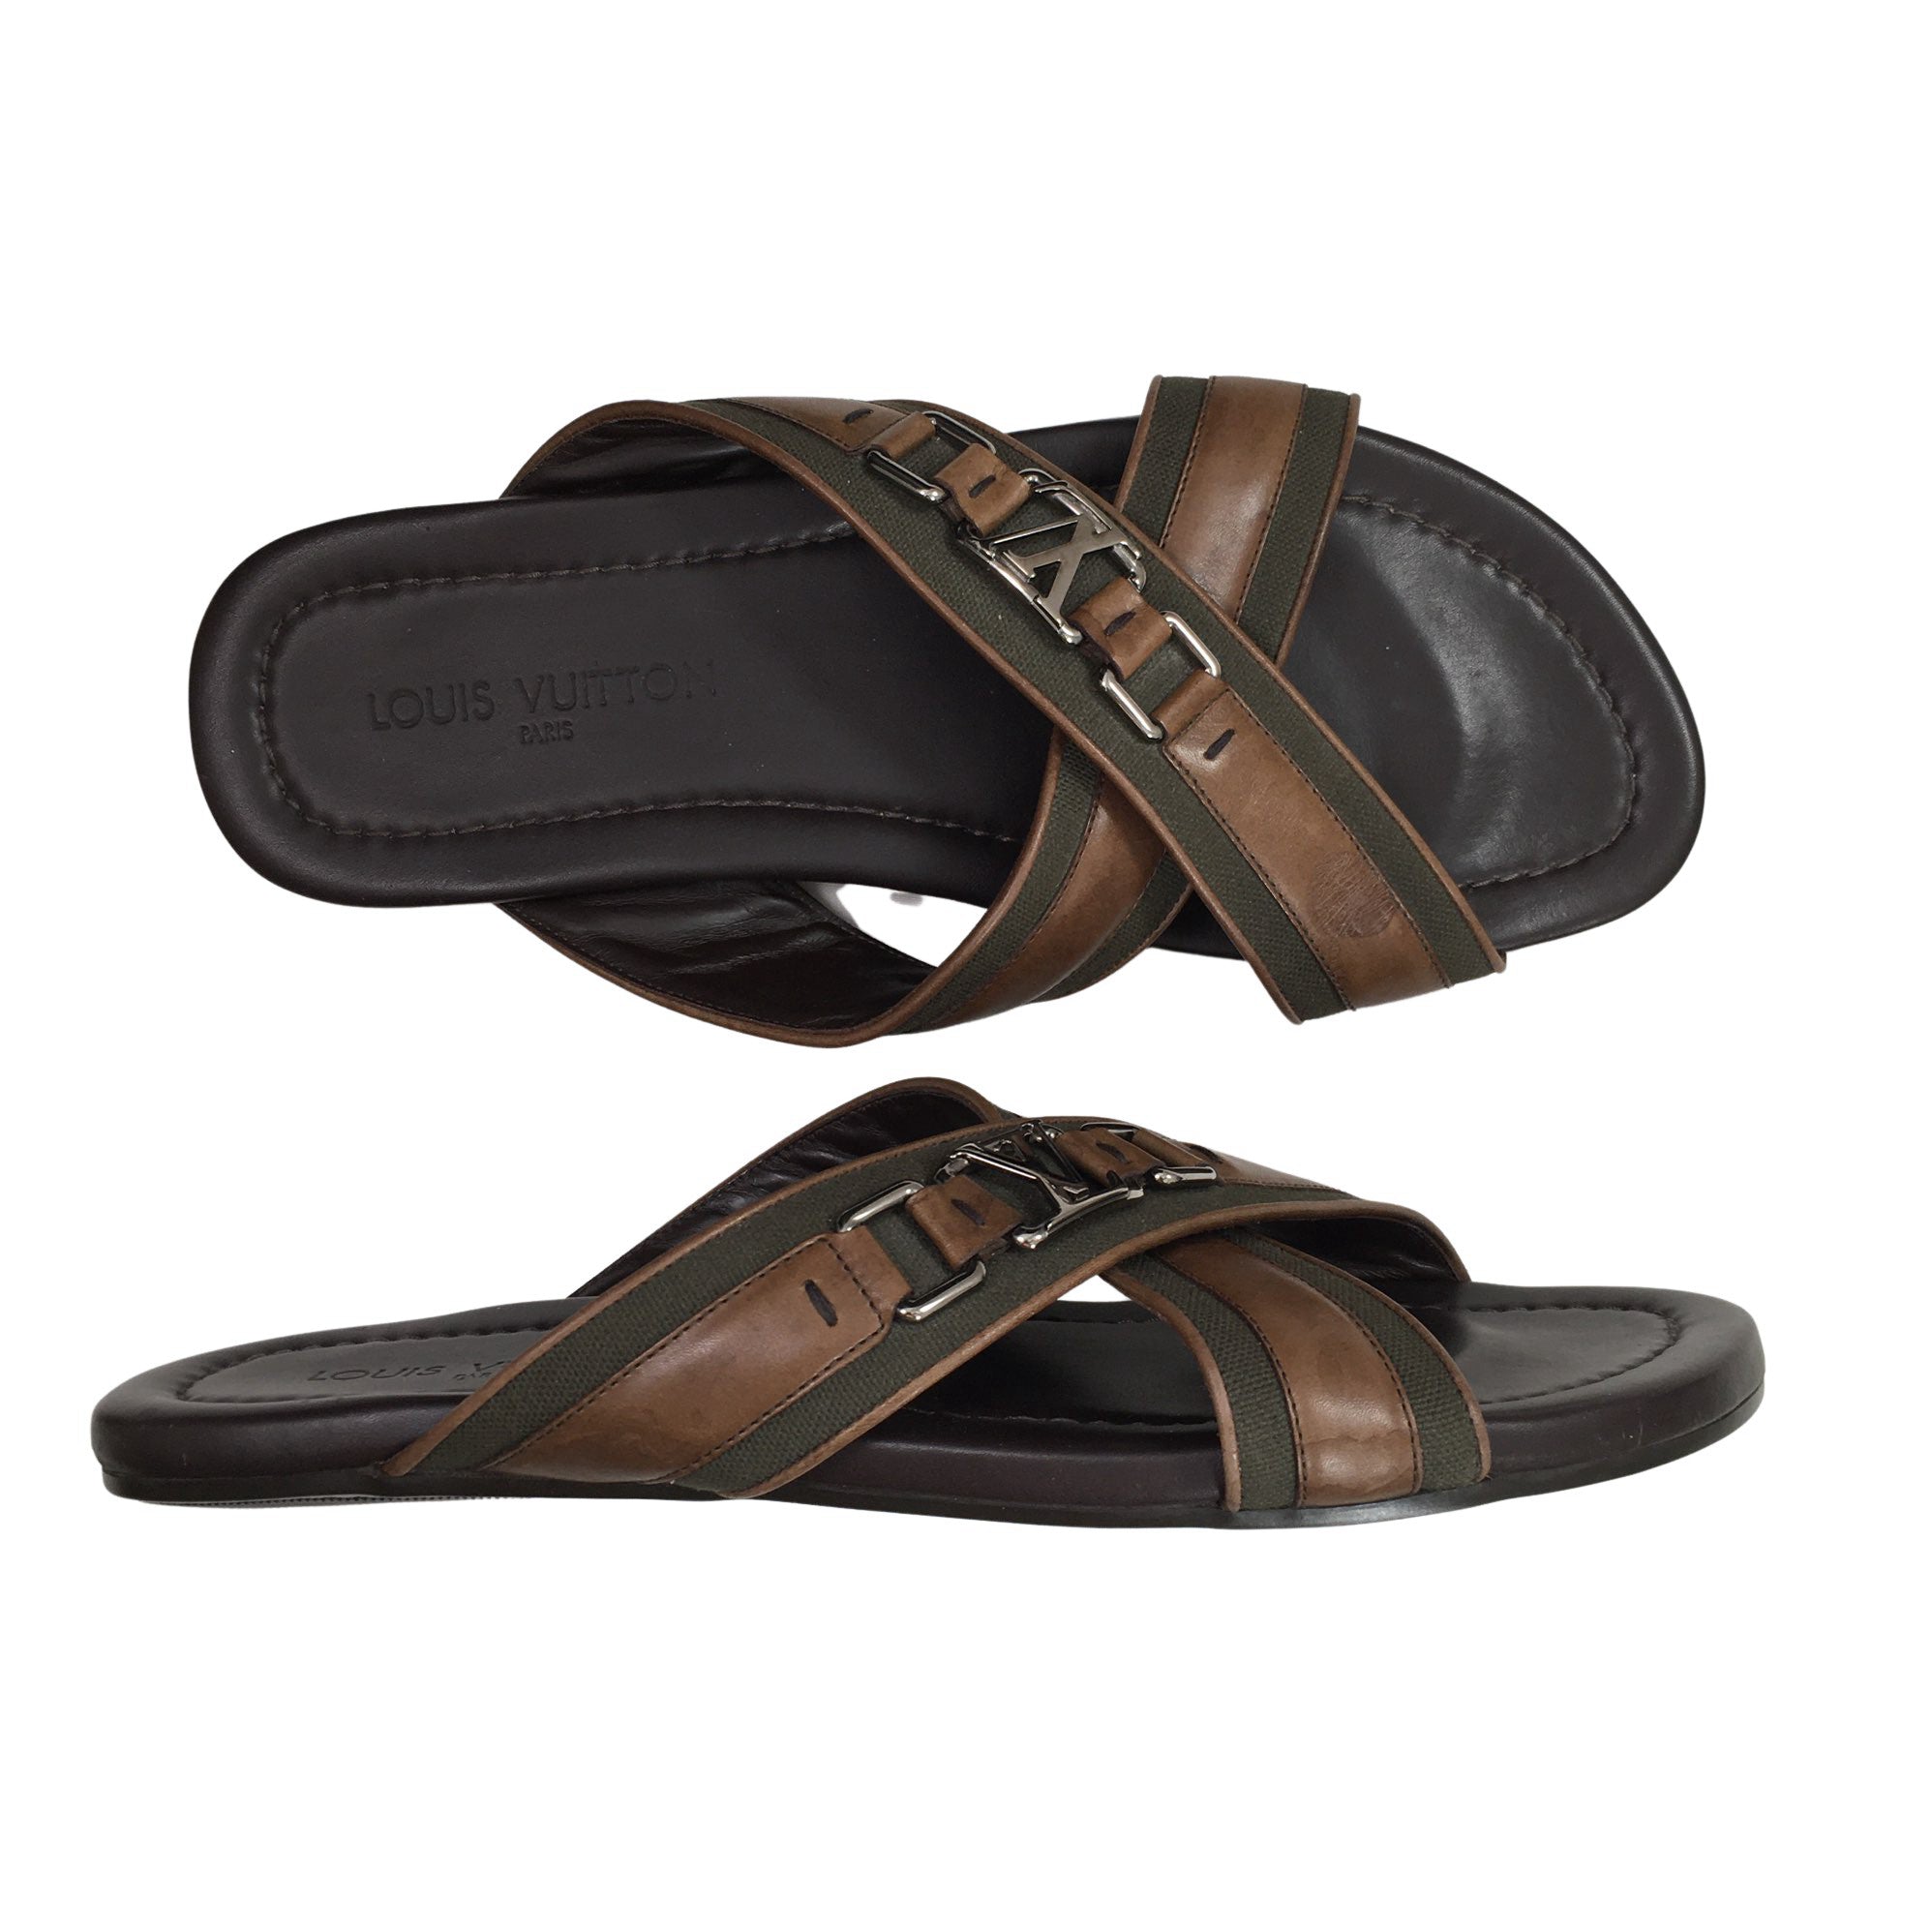 Leather sandals Louis Vuitton Brown size 7 UK in Leather - 19824100